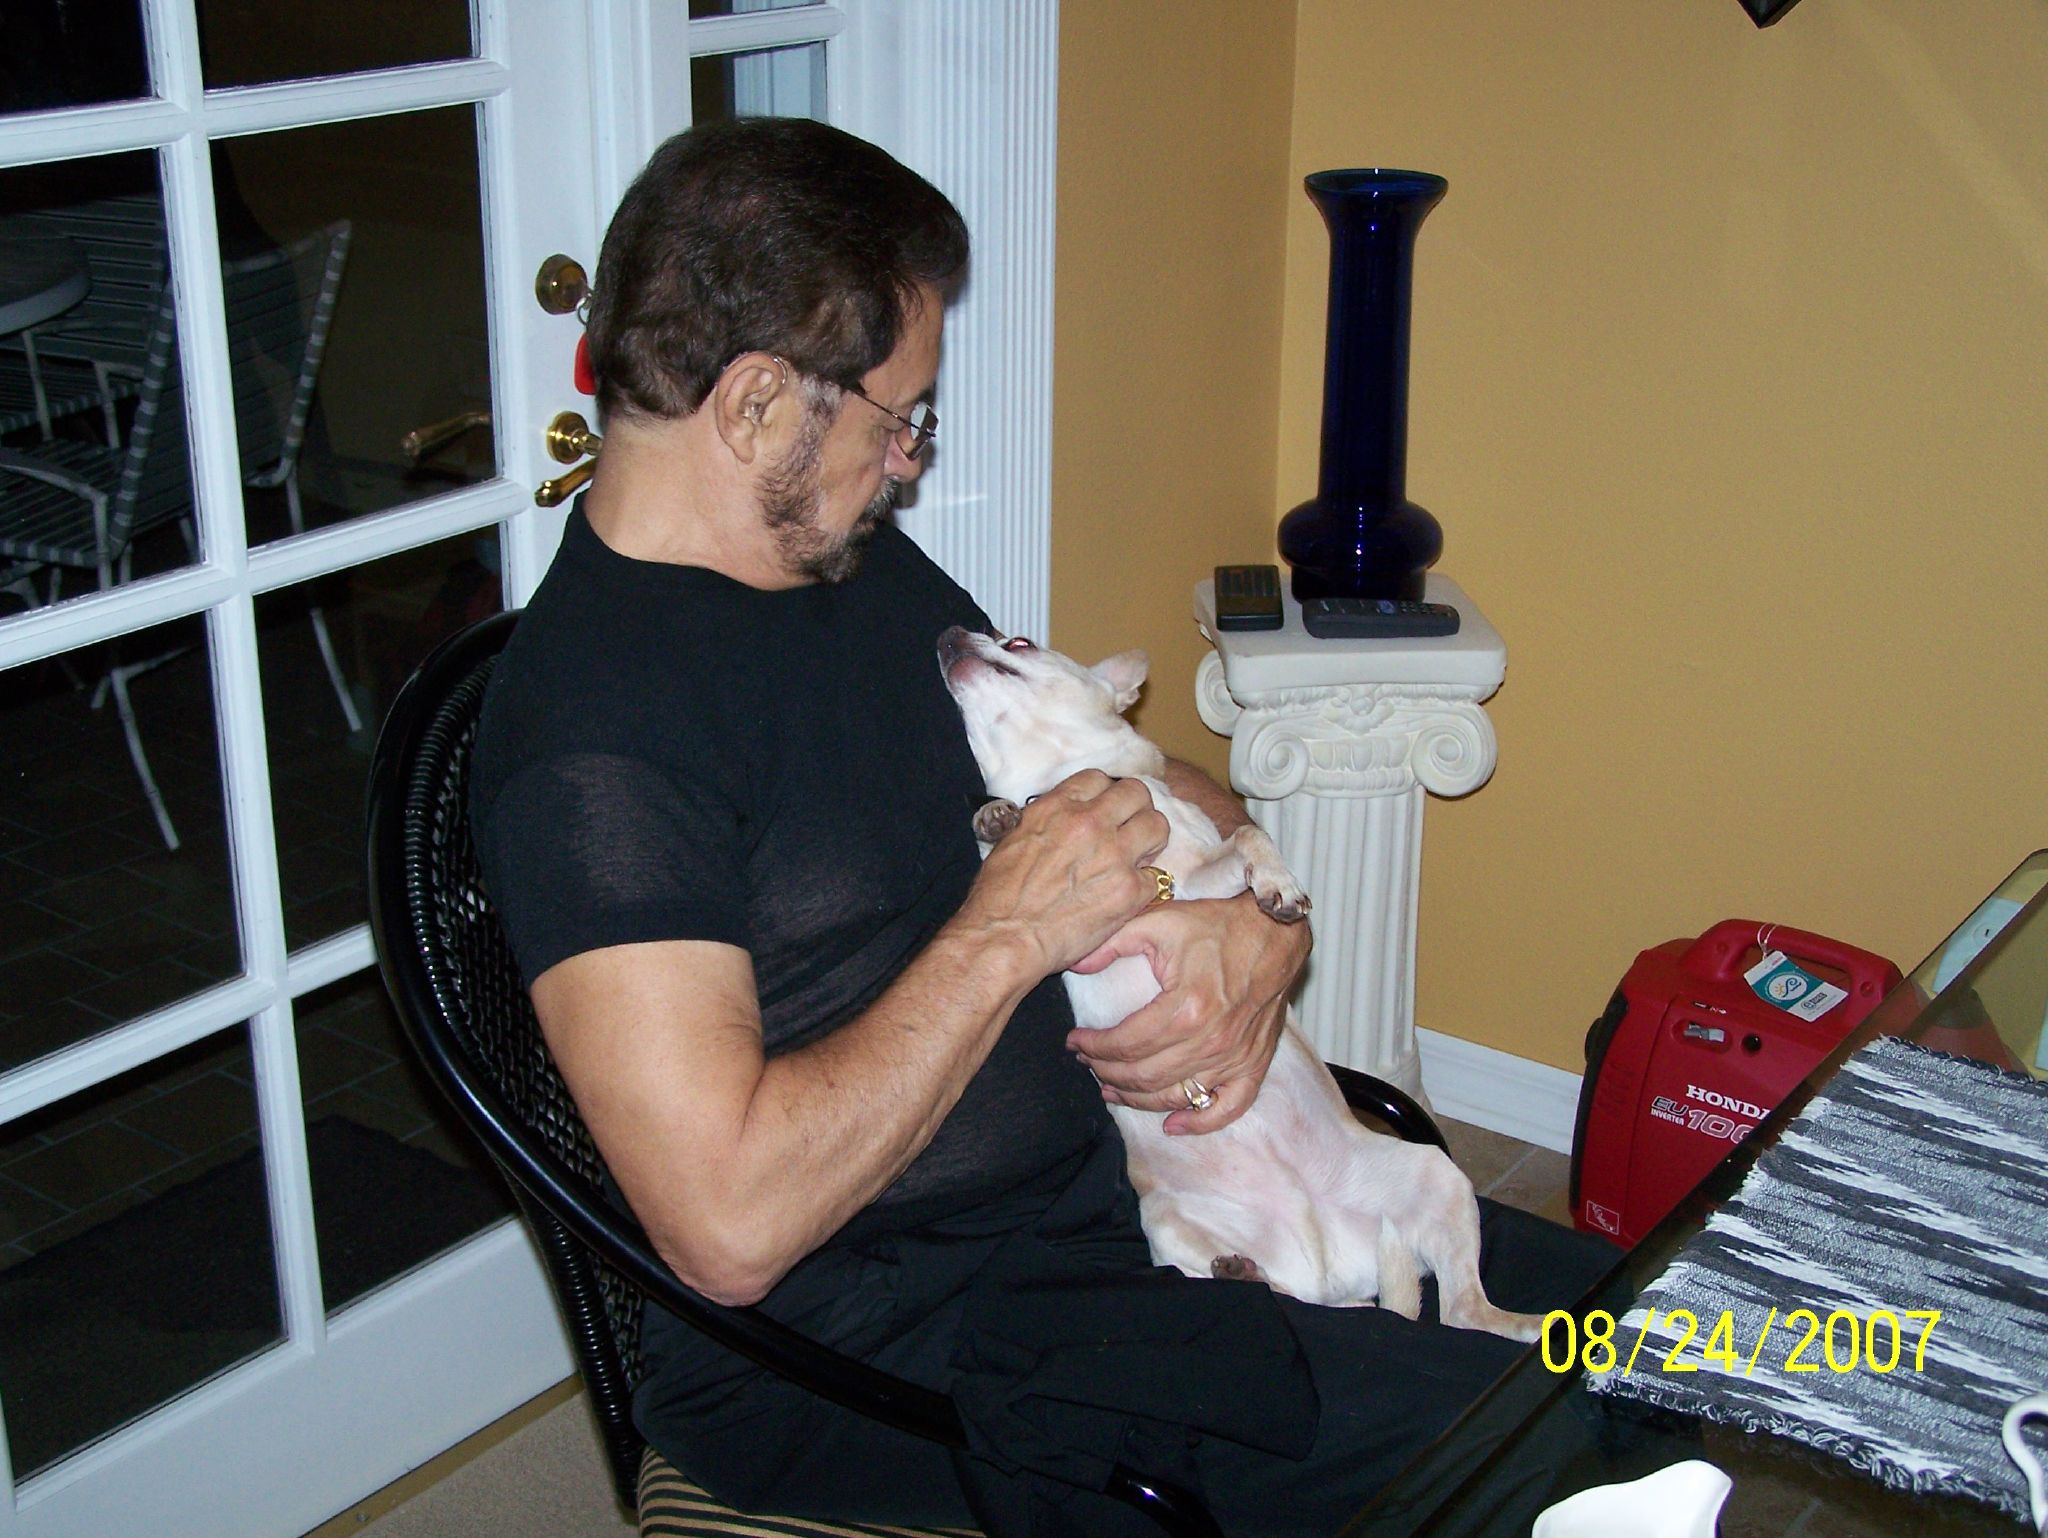 a man sits on his laptop while holding a small dog